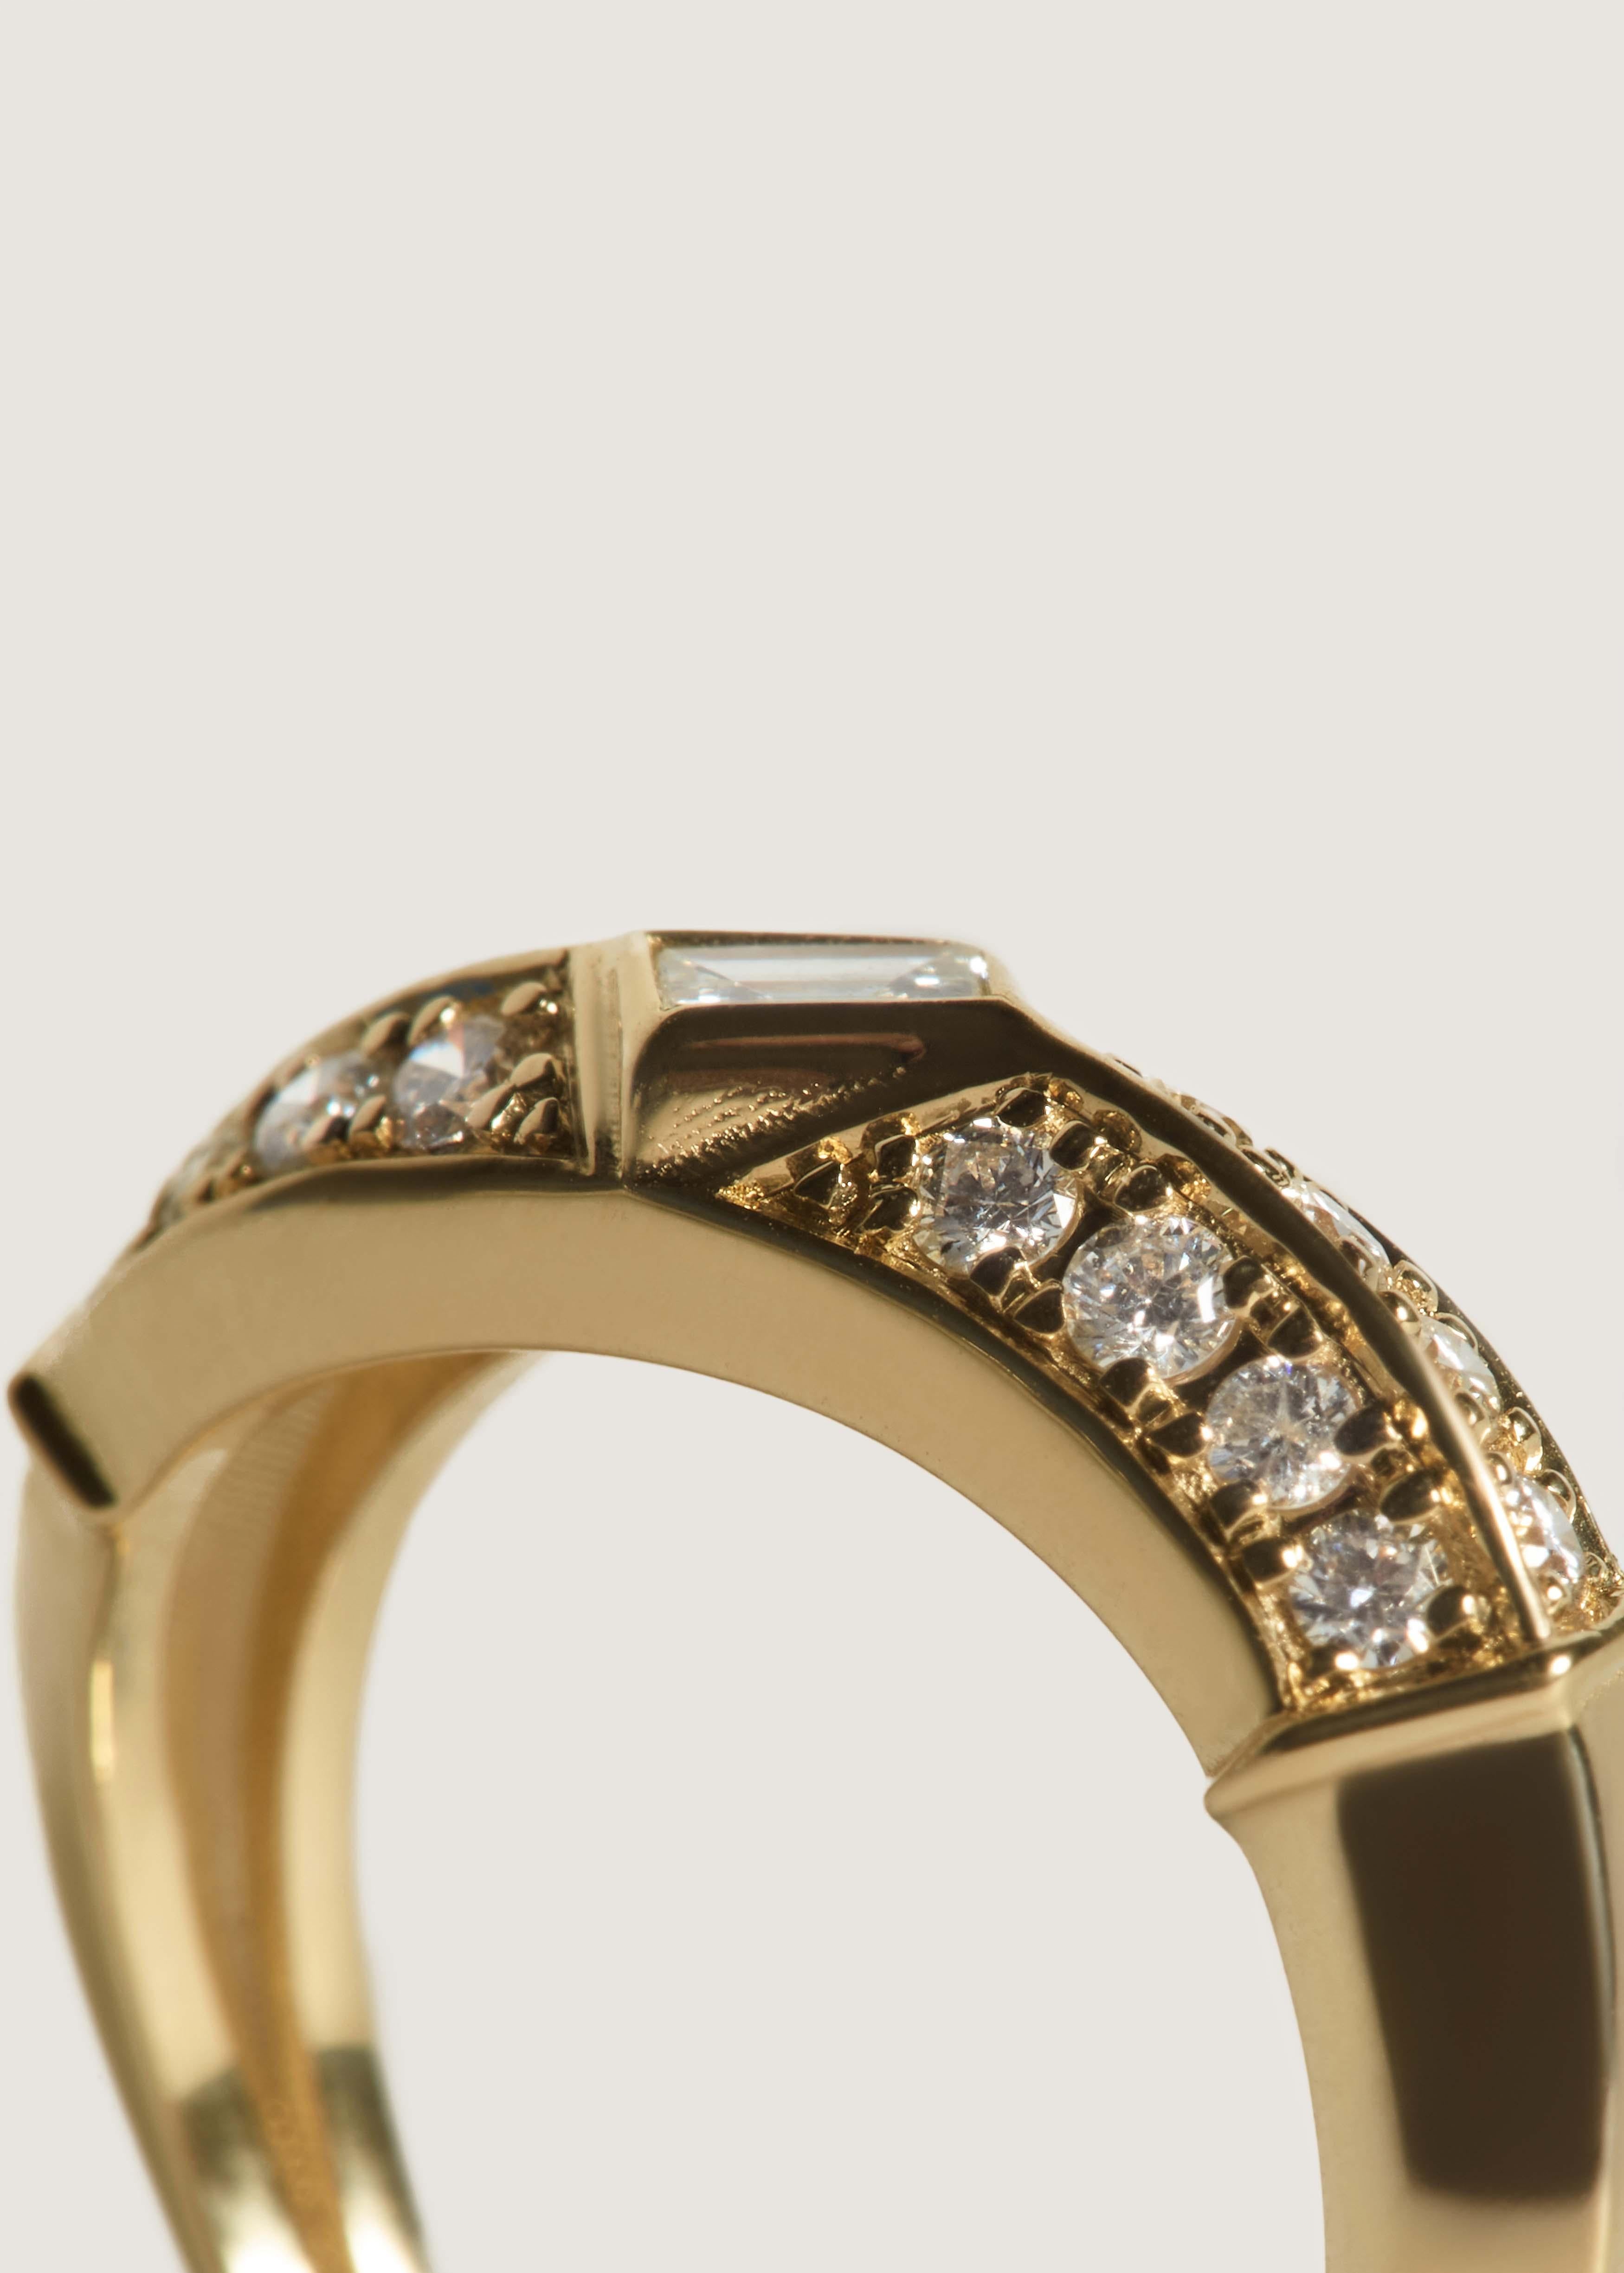 Baguette Cut Franco Curved Ring 14k Solid Yellow Gold 0.5 Carat Diamonds For Sale